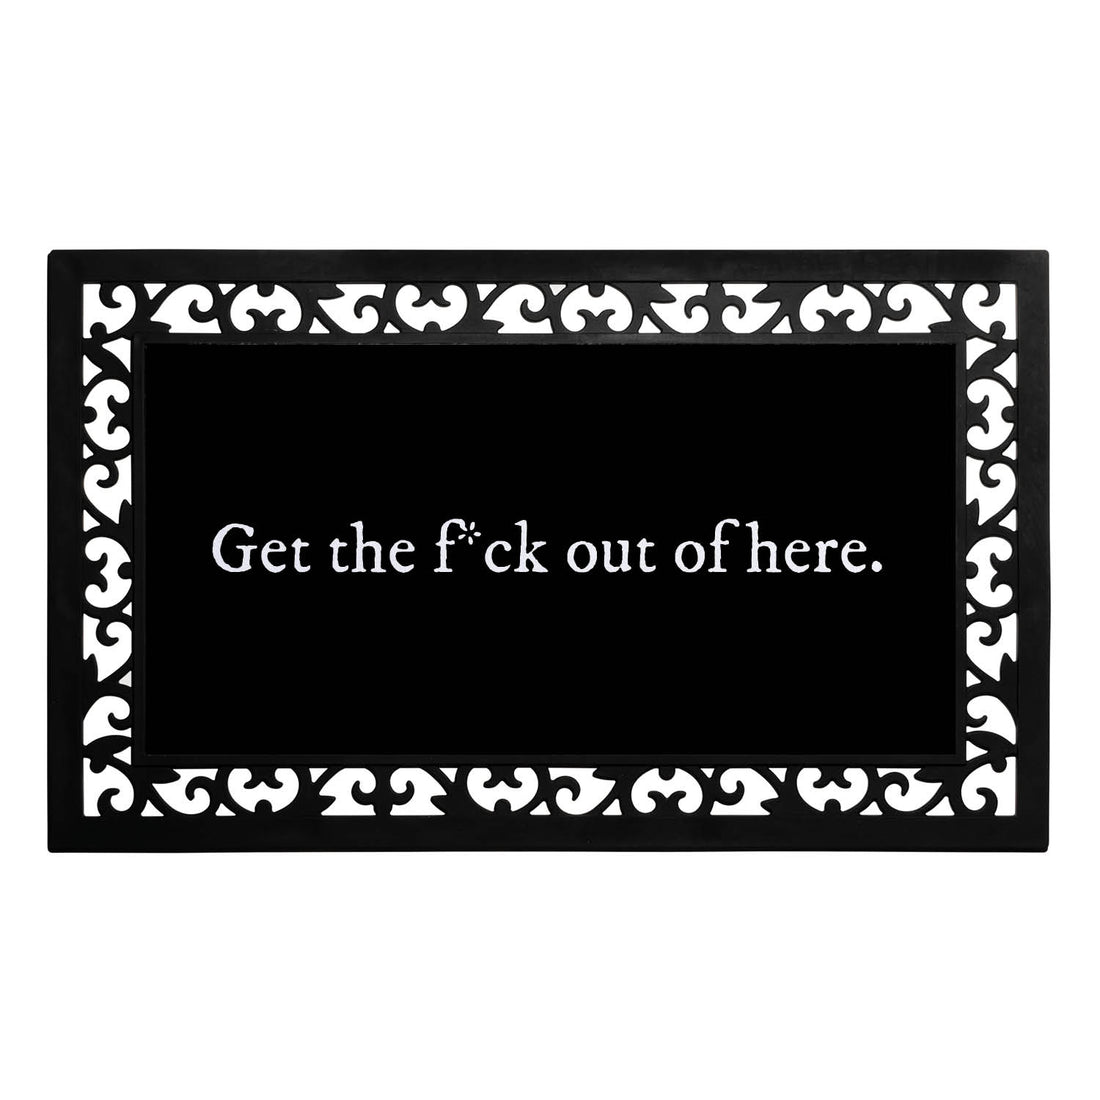 This is Monsters Get the F*ck Out of Here Rubber Doormat